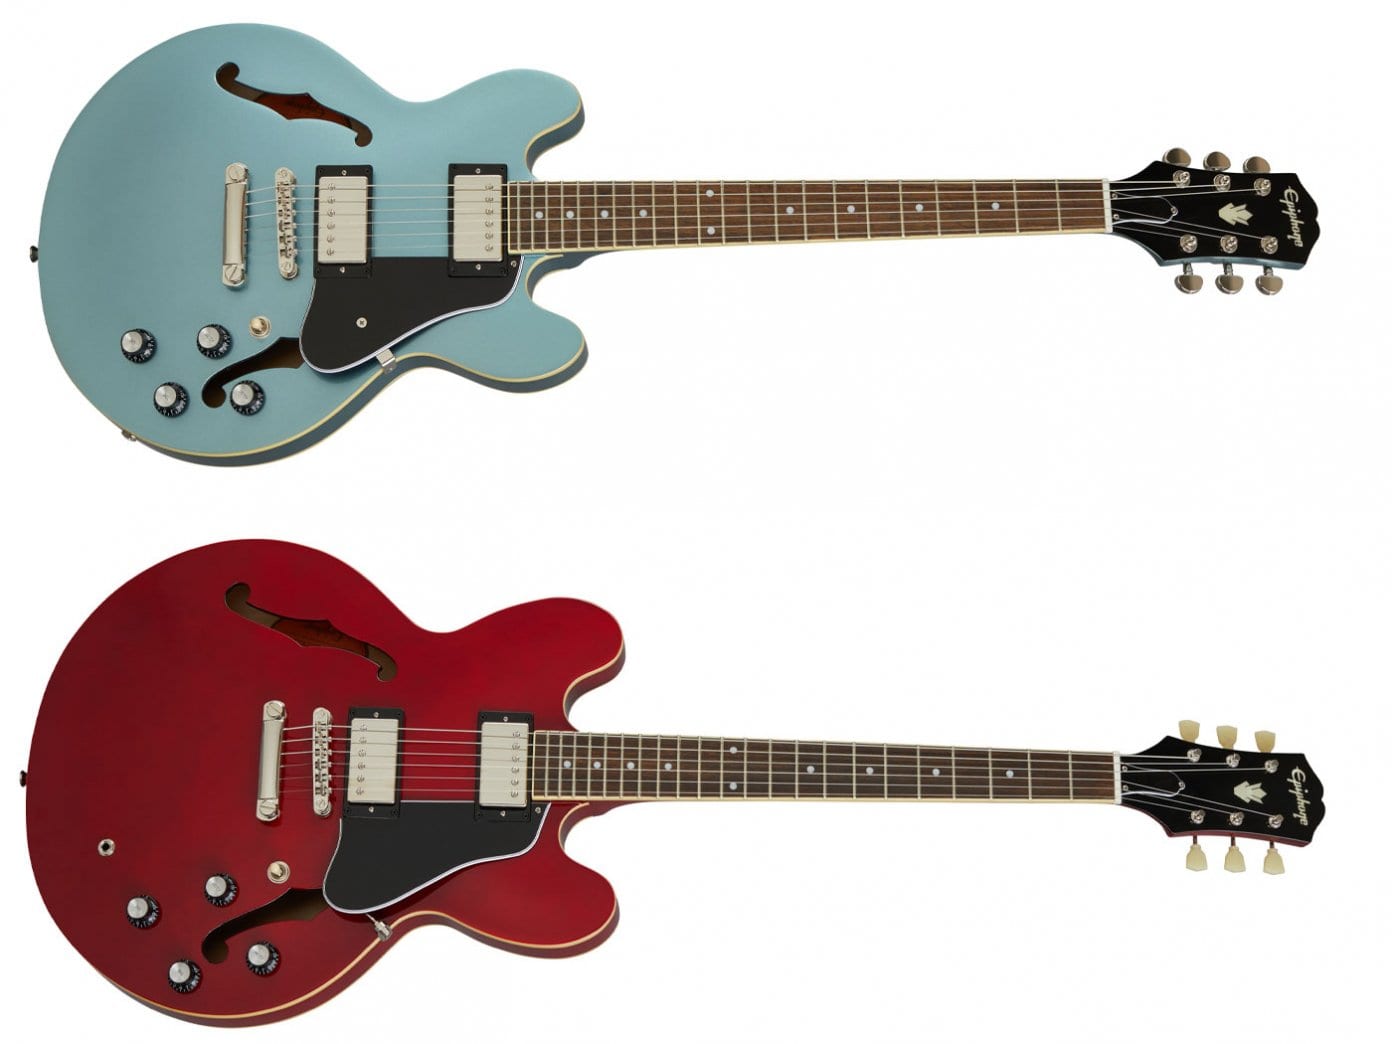 Epiphone Inspired By Gibson ES-339 and the ES-335 models